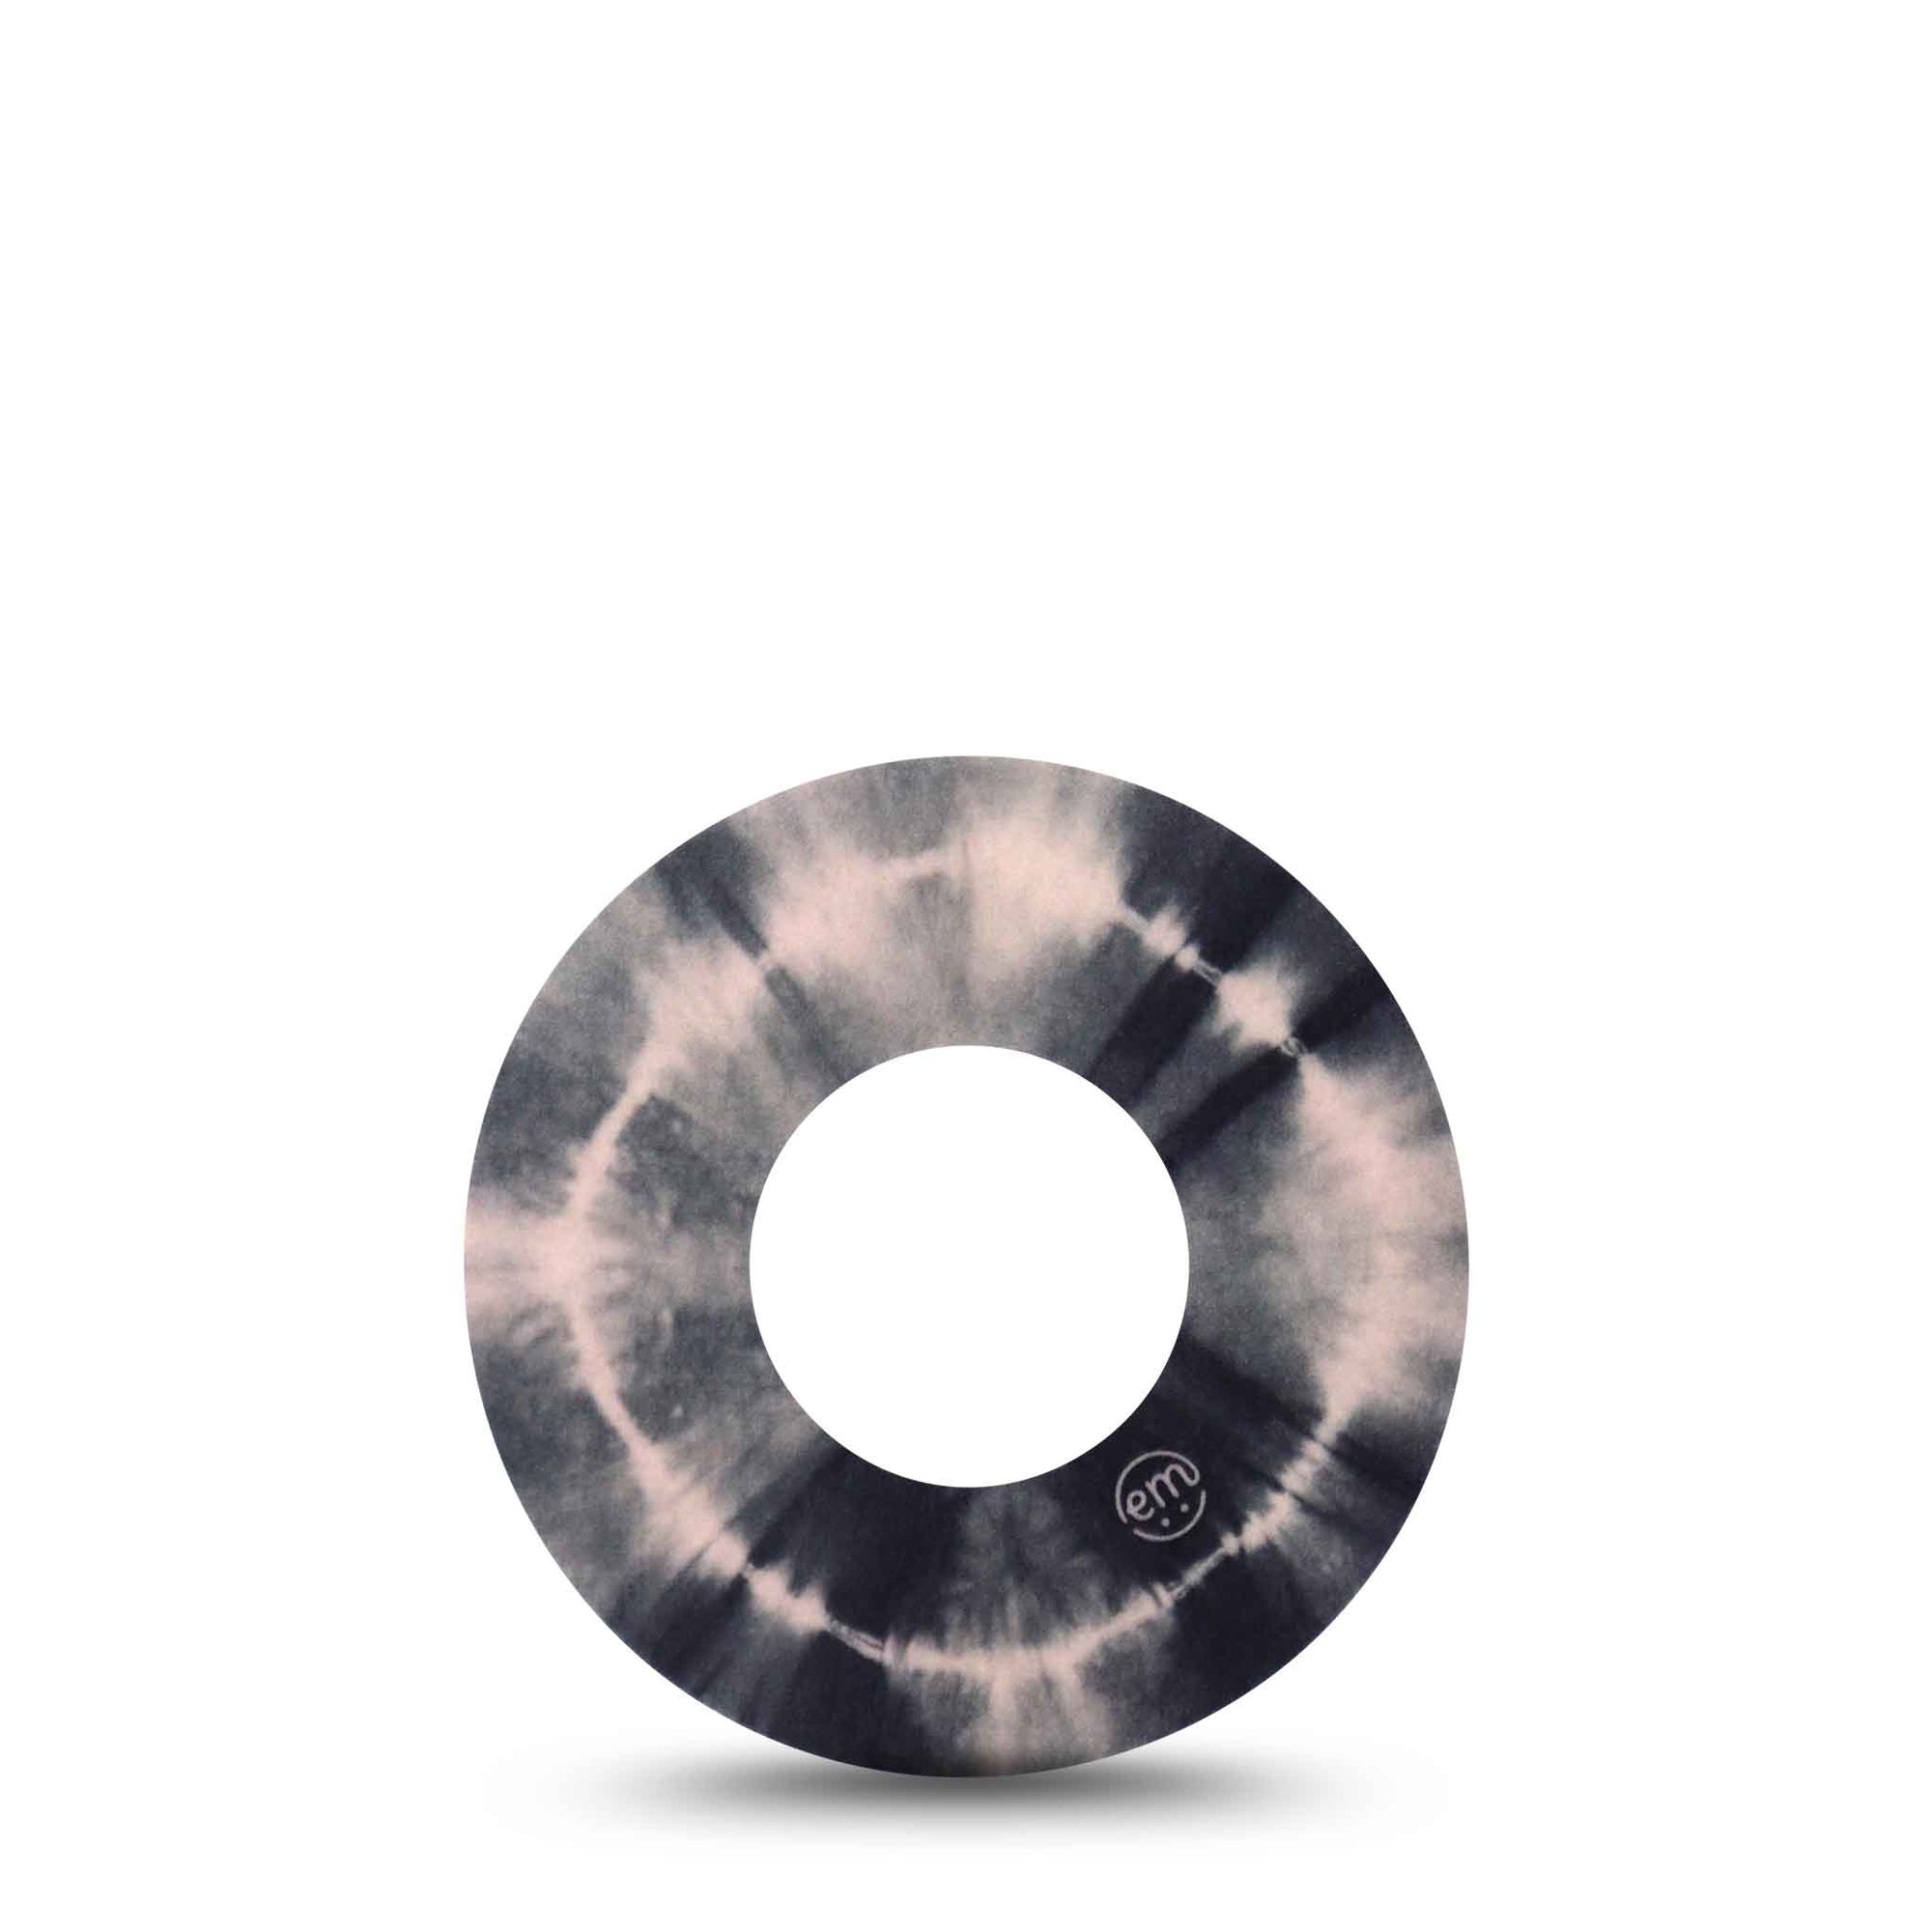 ExpressionMed Black and Grey Tie Dye Libre Overpatch